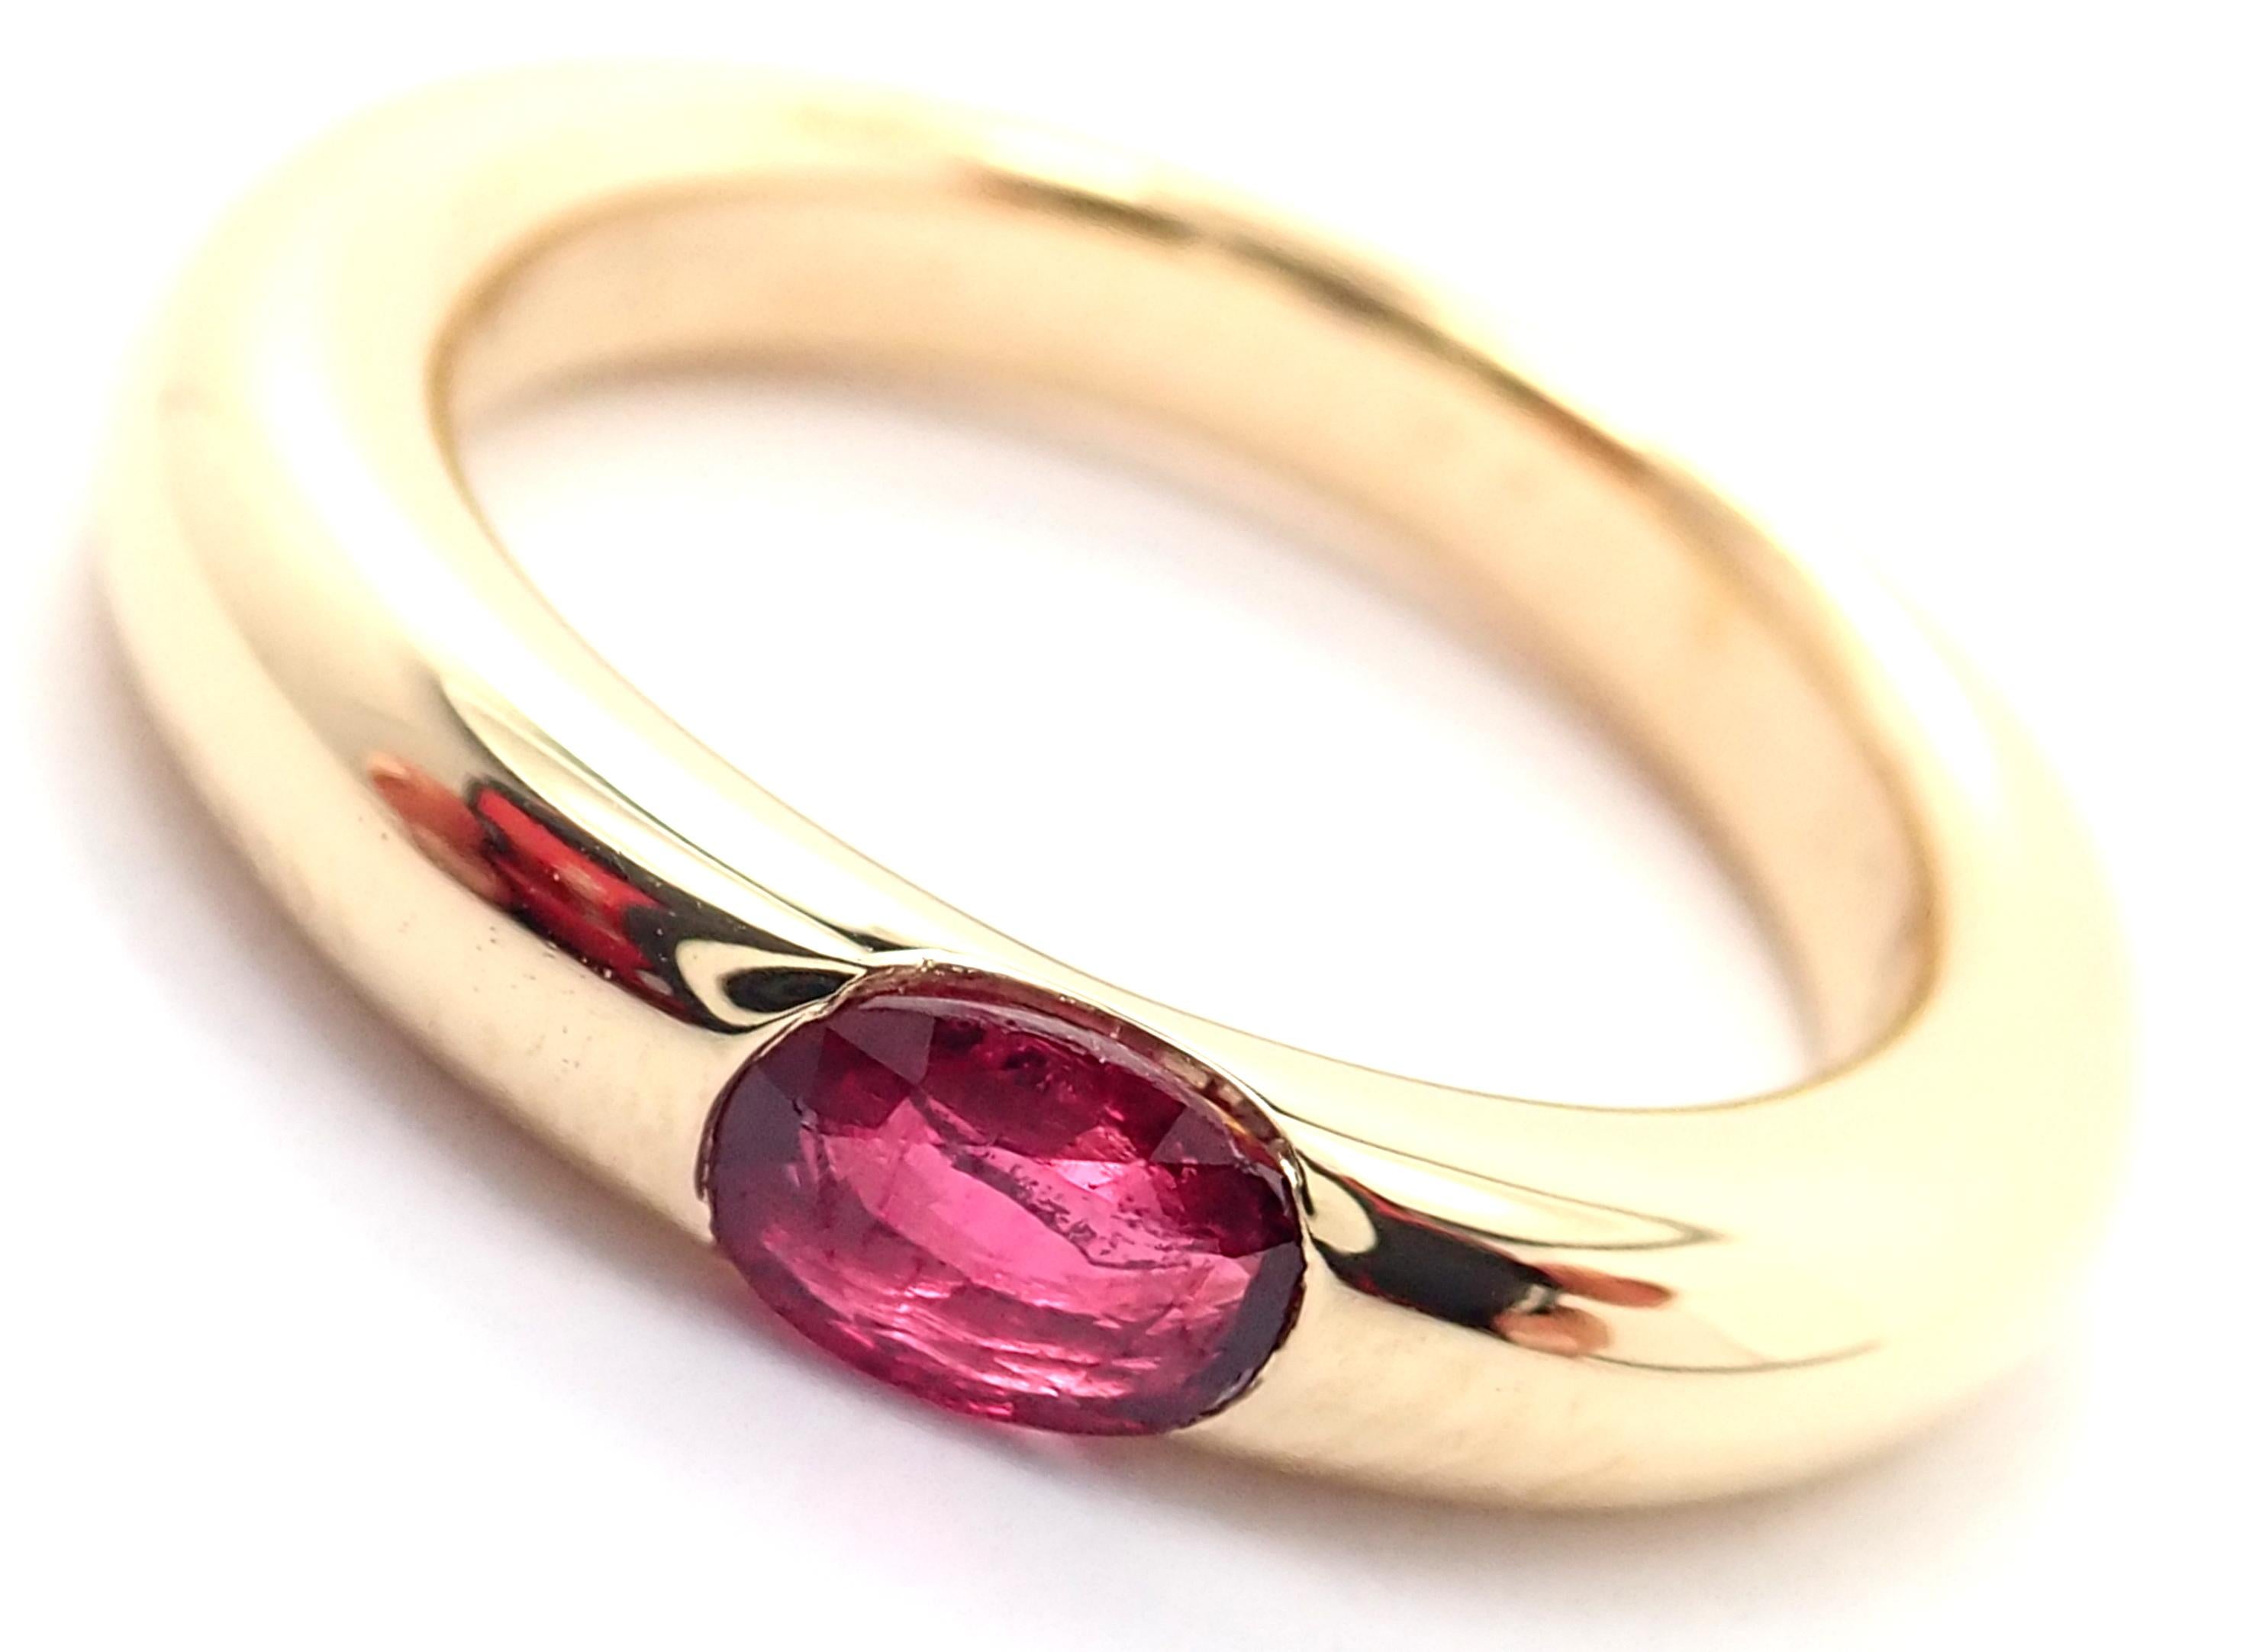 18k Yellow Gold Ellipse Ruby Band Ring by Cartier.
With 1 oval-shaped beautiful ruby 5mm x 4mm.
Details:
Width: 4mm
Weight: 8.3 grams
Ring Size: EEuropean 51, US 5.5
Stamped Hallmarks: Cartier 750 51 B72188
*Free Shipping within the United